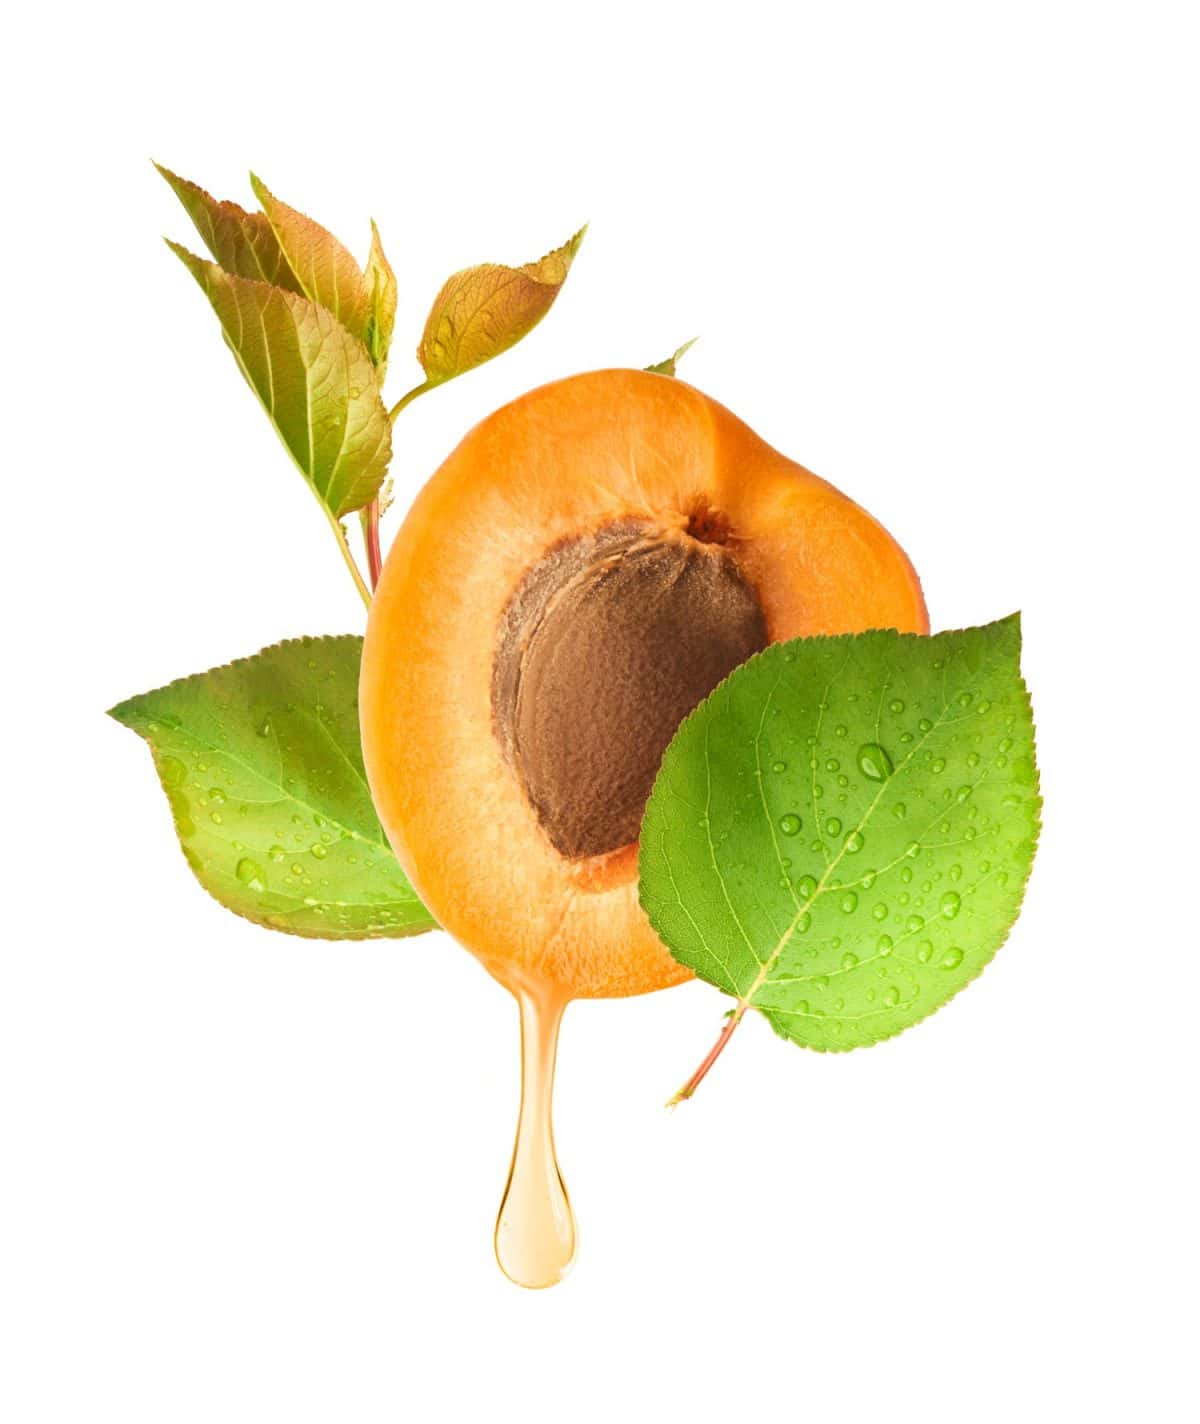 Fresh raw sweet Apricot with green leaves isolated on white background. Apricot oil dripping from the seed. High resolution collection. extremely dry hair shampoo